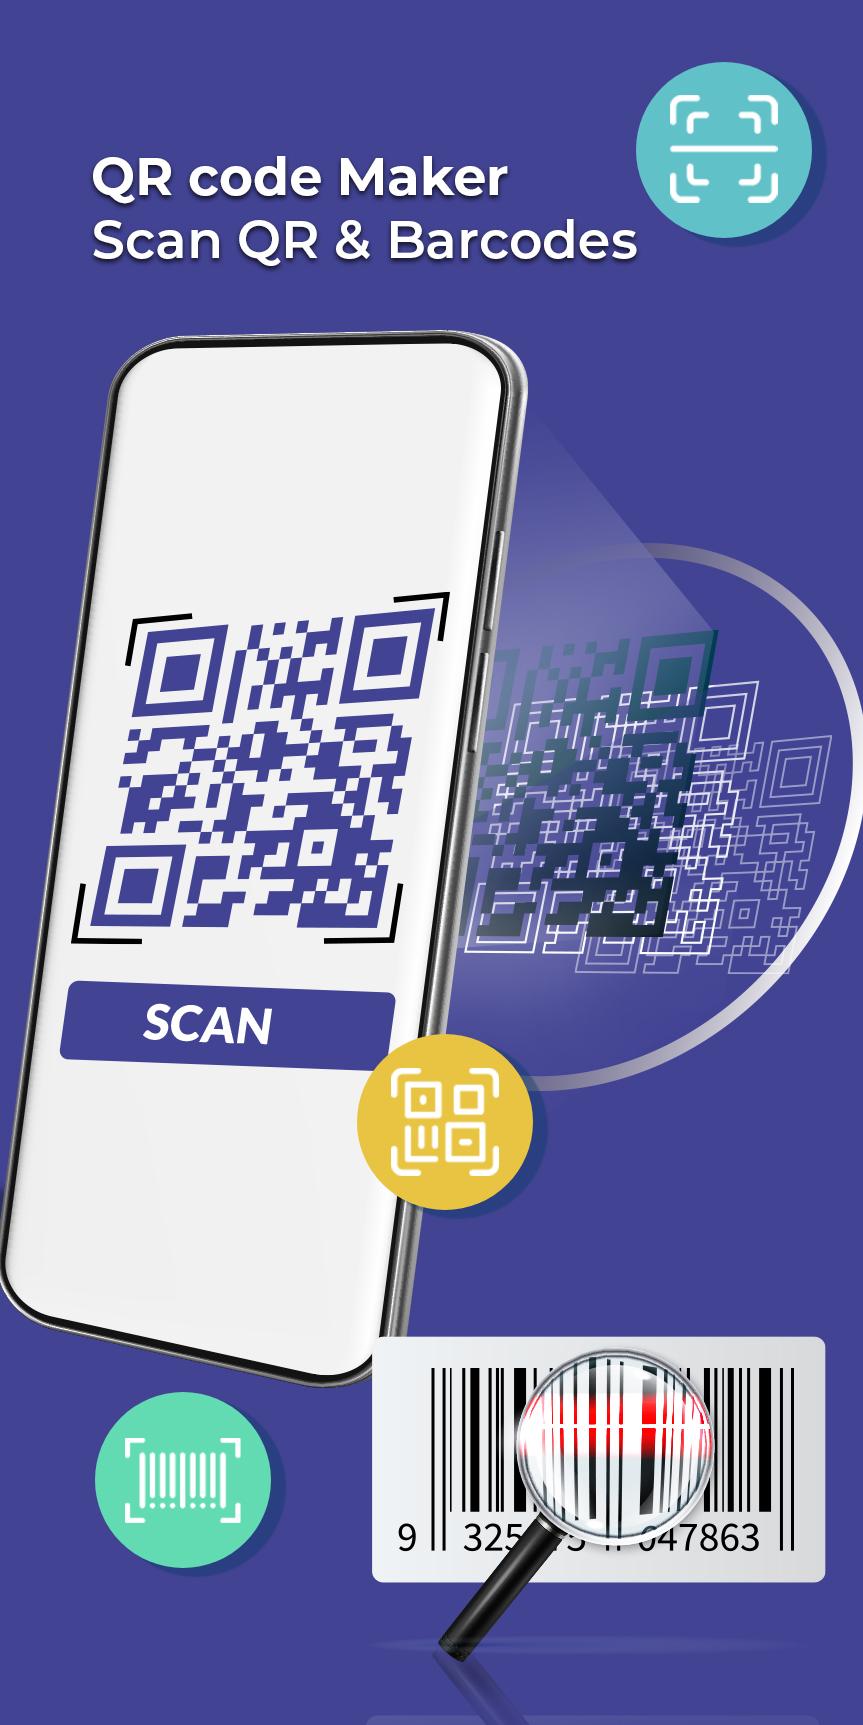 Camscan - Fast Scanner & Editor for Android - APK Download